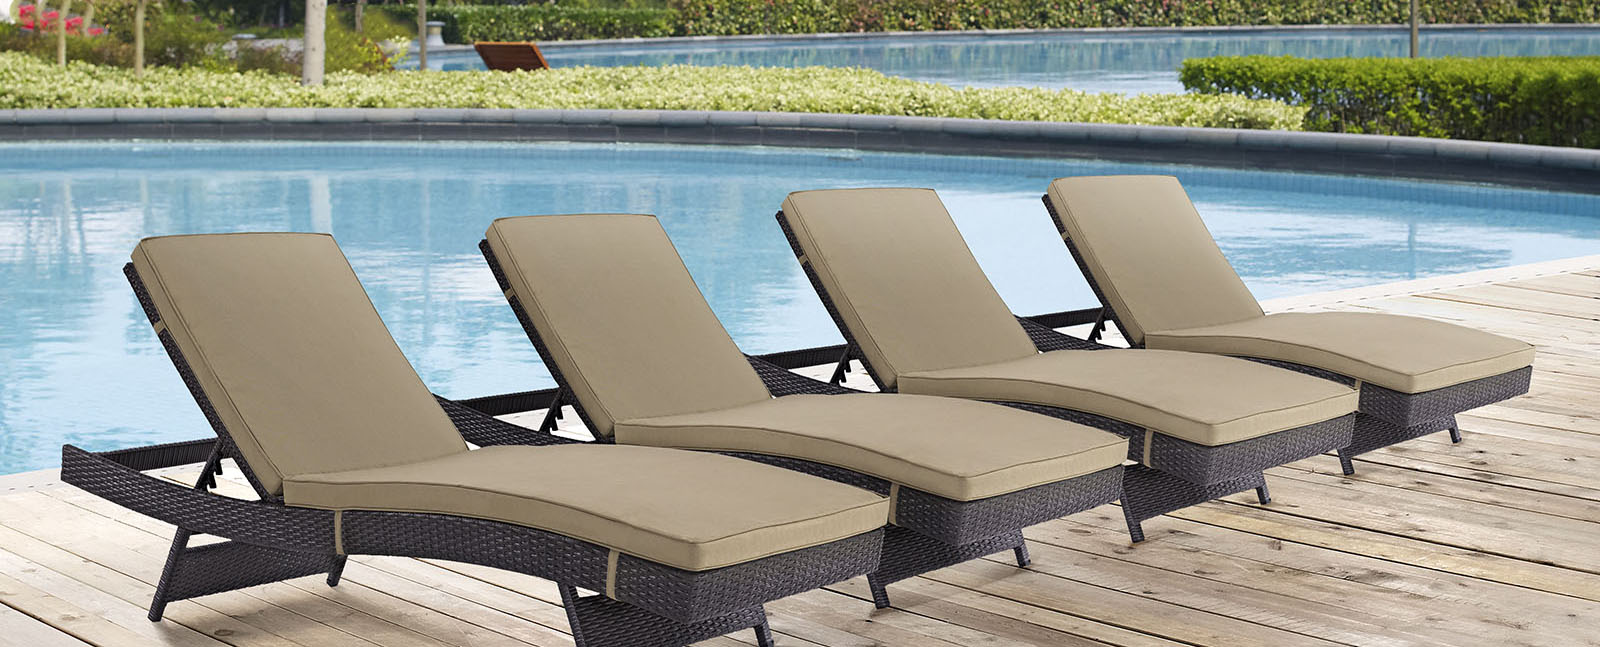 outdoor daybeds and lounge chairs